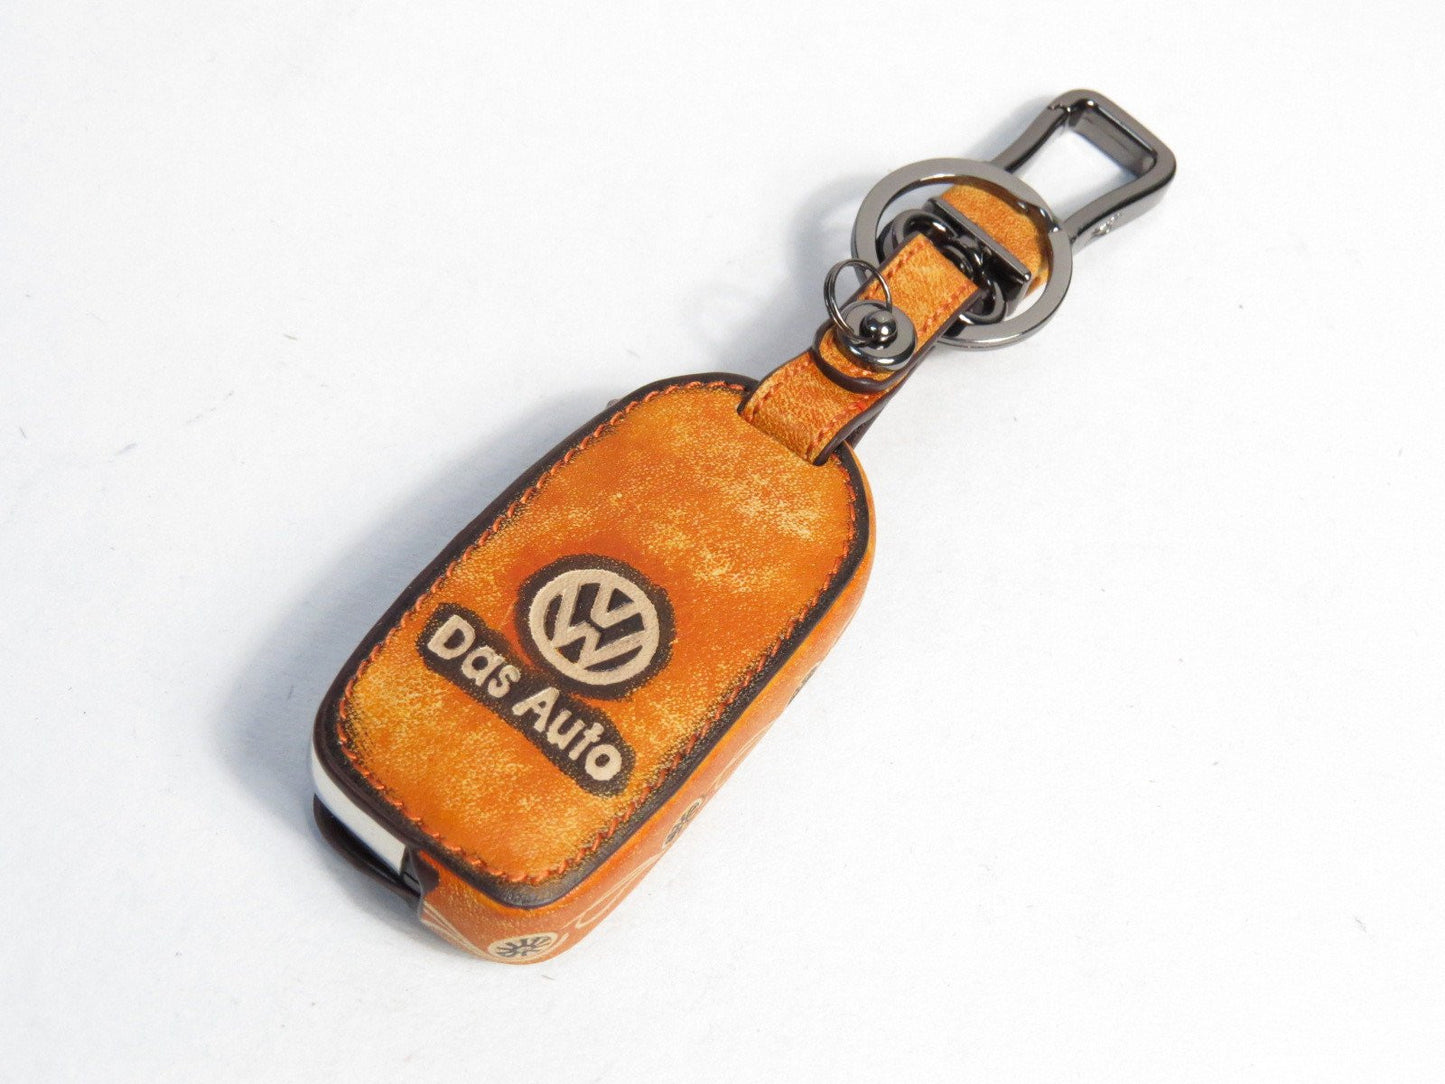 Pinalloy Retro Brown Genuine Leather Folding Key Holder Case Cover For VW Golf Passat MK6 - Pinalloy Online Auto Accessories Lightweight Car Kit 